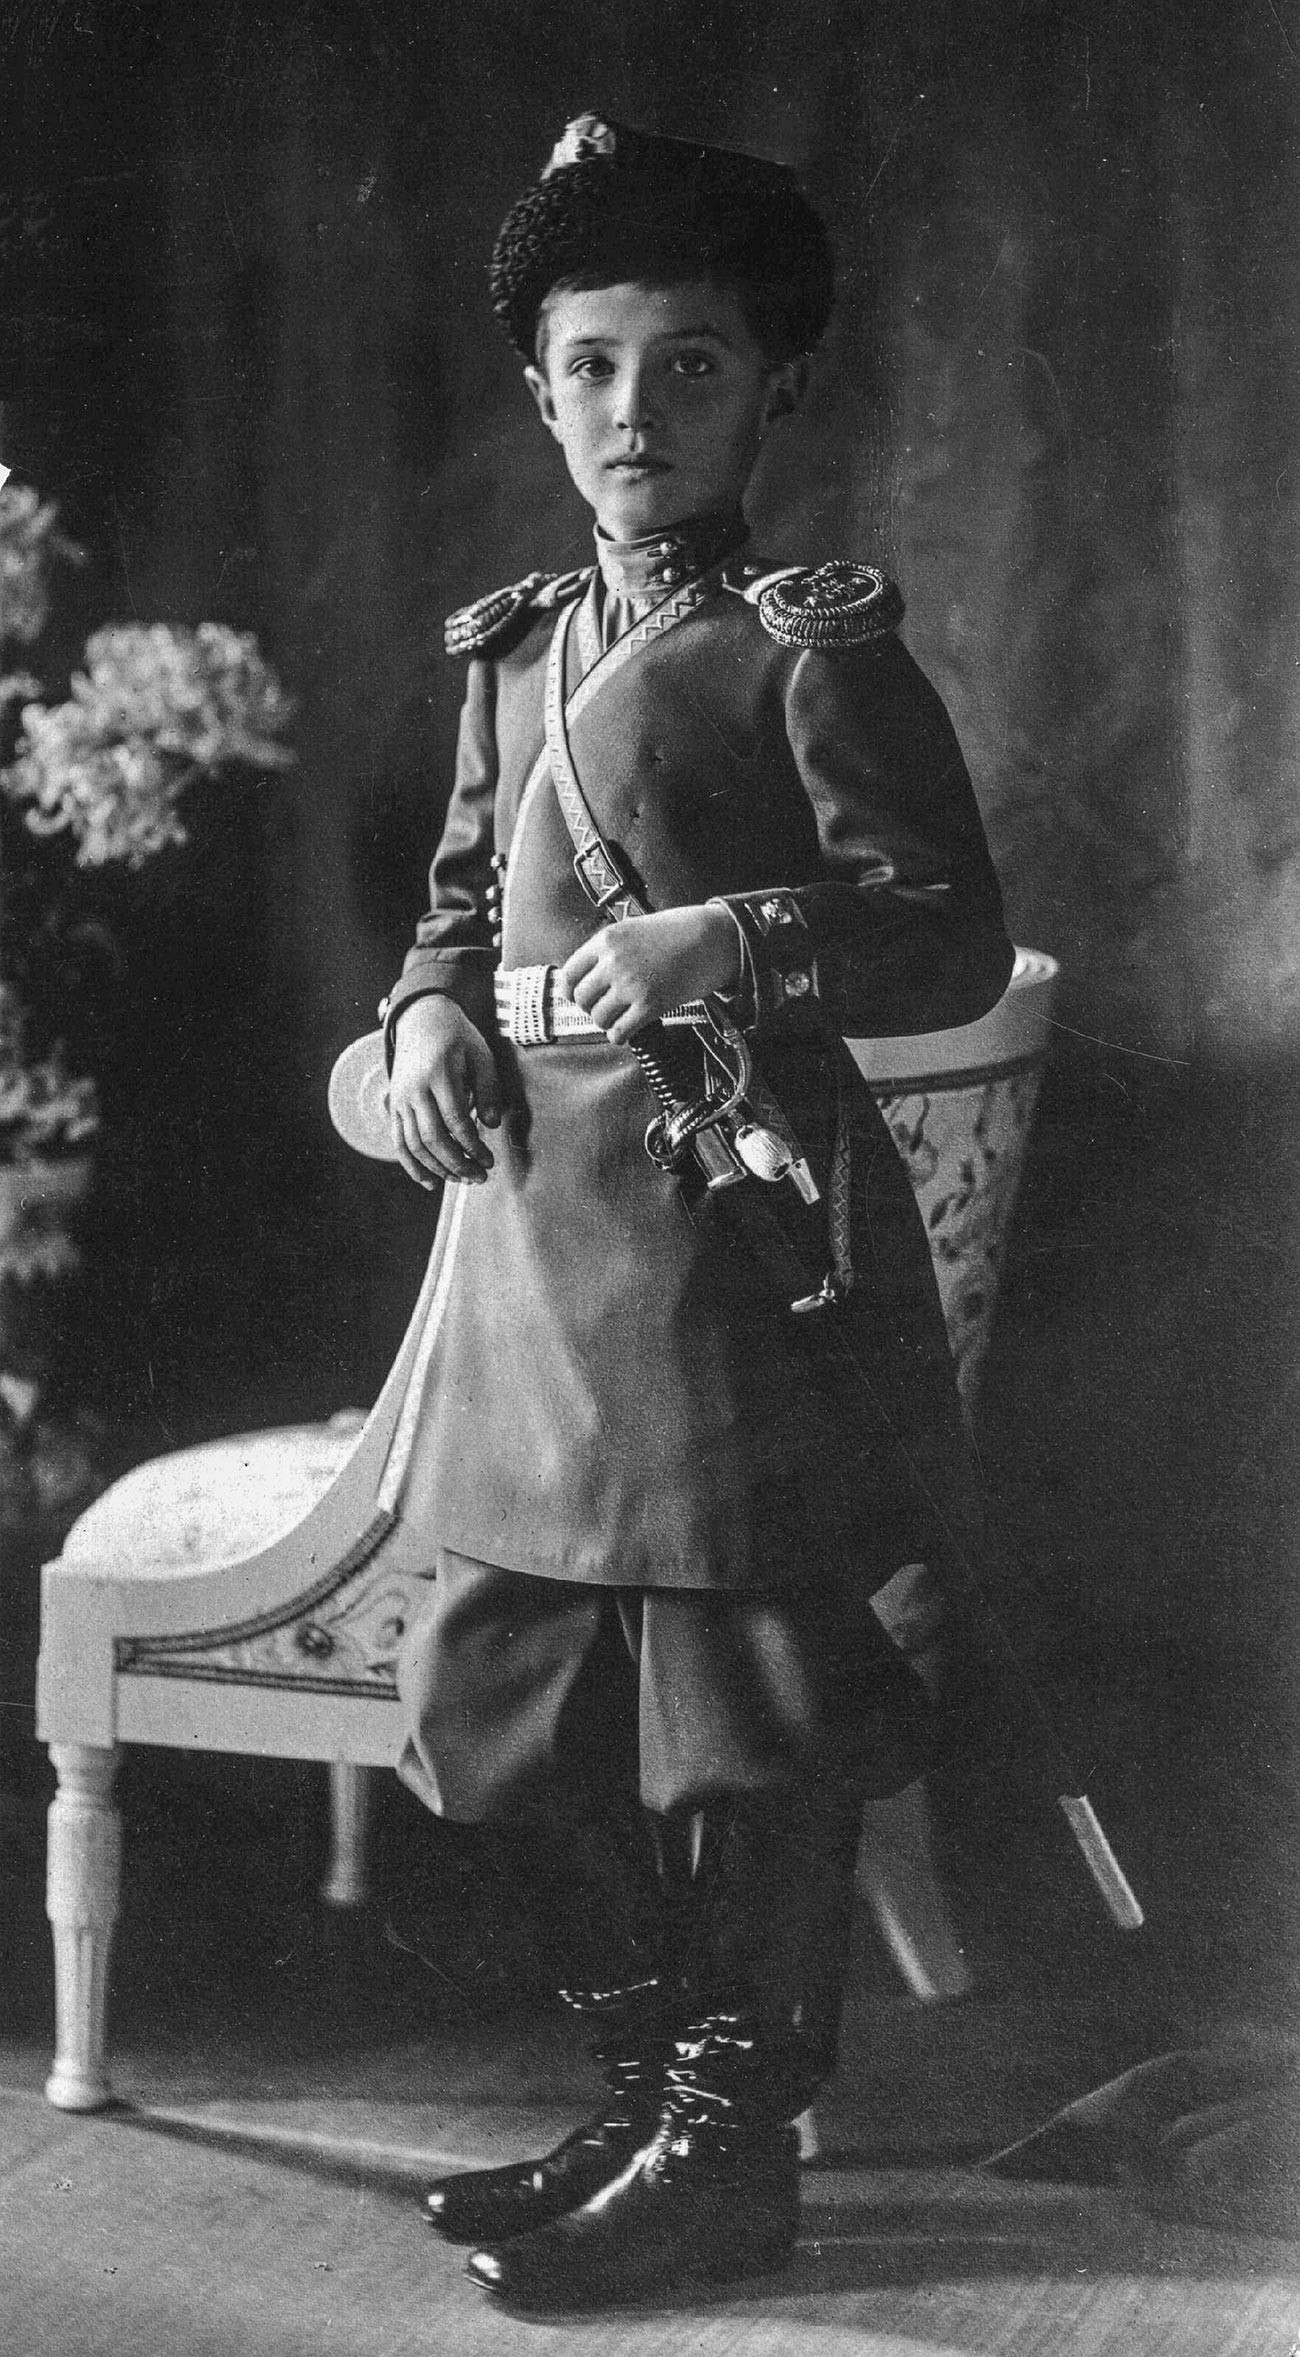 Alexei Nikolaevich (1904 - 1918), Tsarevich and heir apparent to the throne of the Russian Empire.